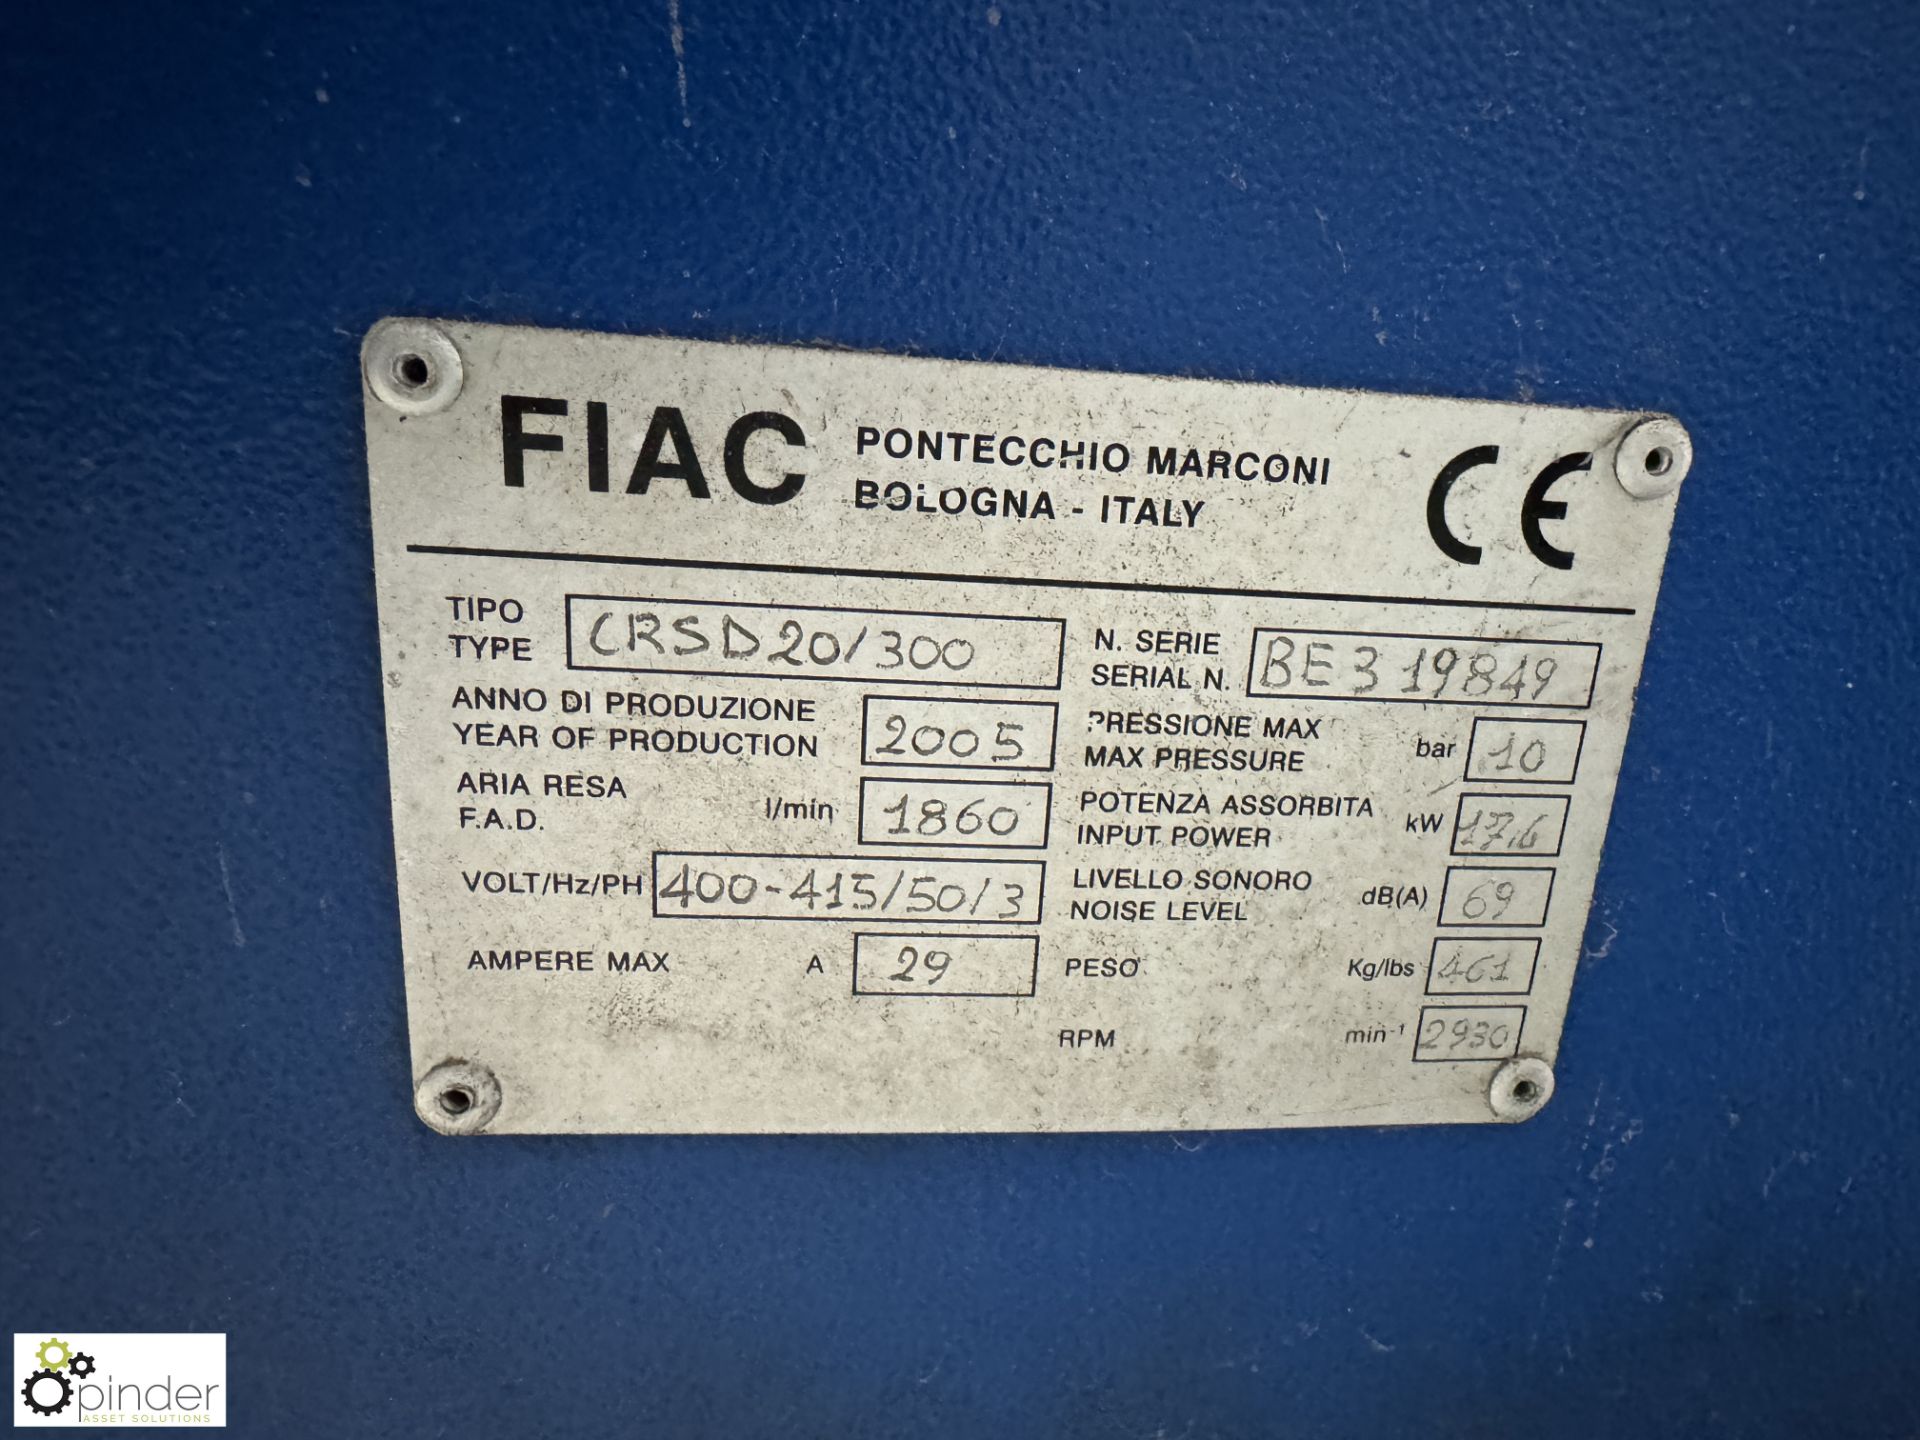 Fiac CRS020/300 receiver mounted Packaged Rotary Screw Air Compressor, max pressure 10bar, 17.6kw, - Image 6 of 8